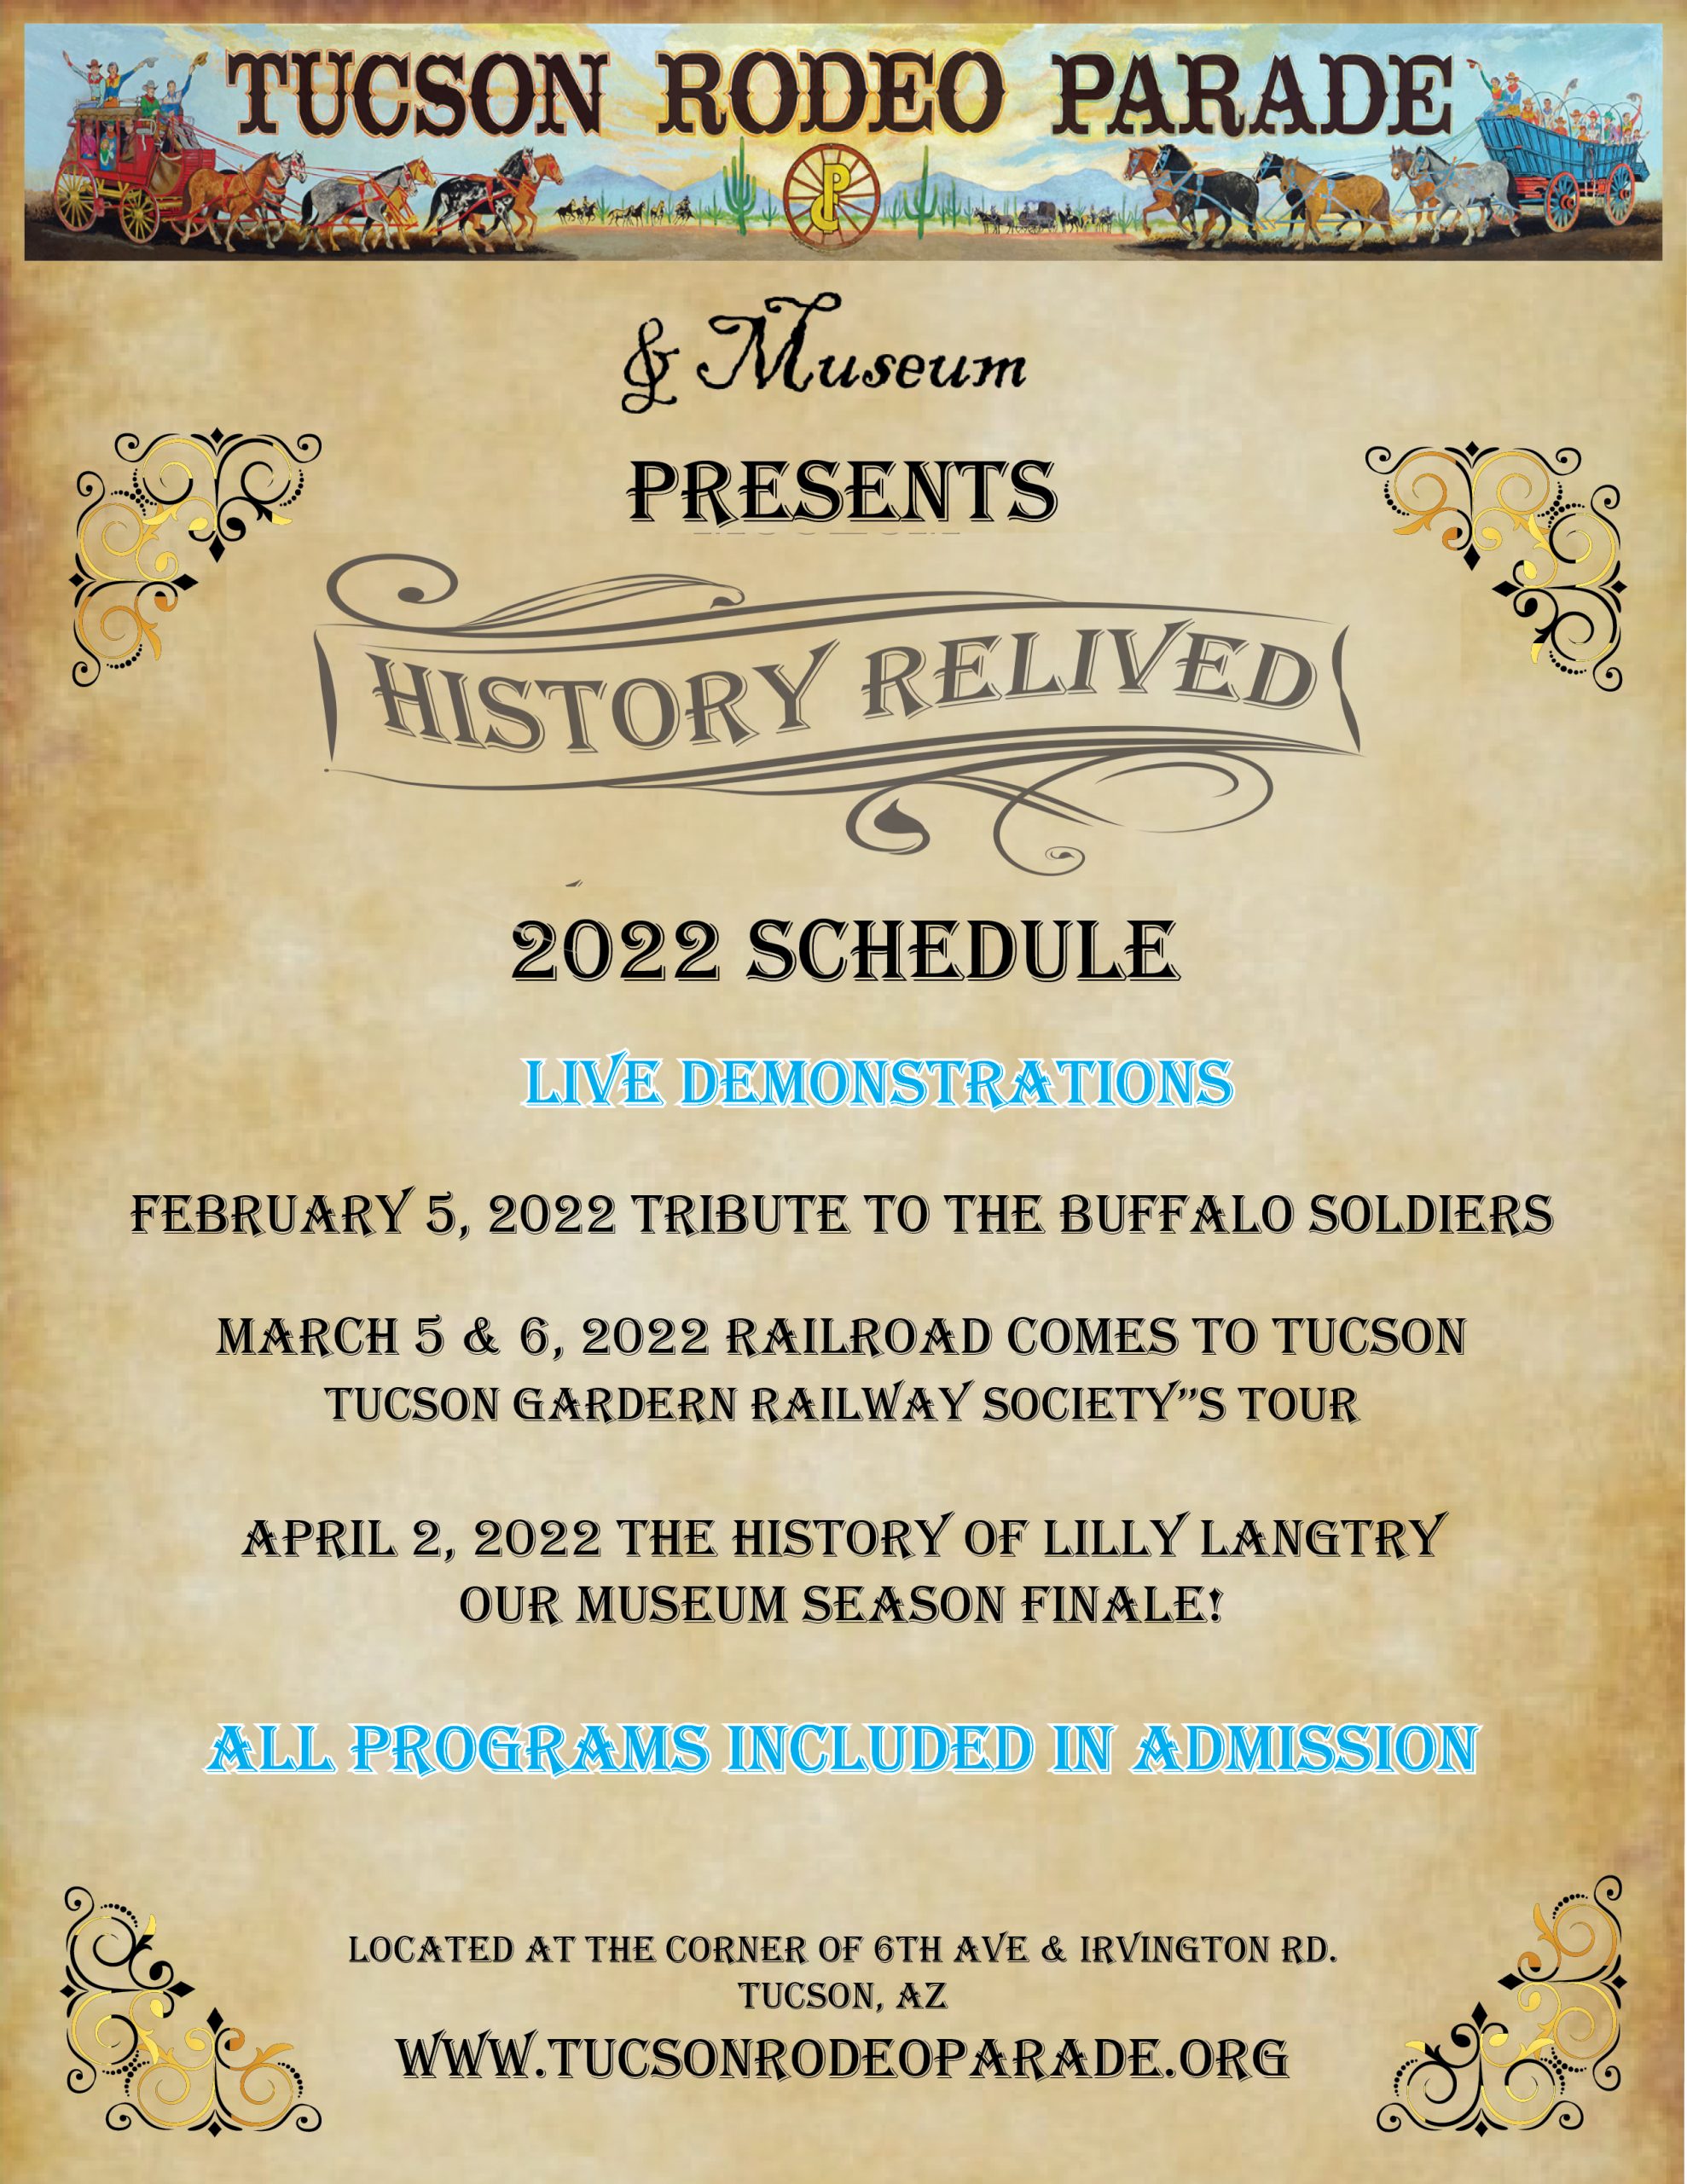 PY 2022 Museum History Relived Schedule revised 1-11-2022 short